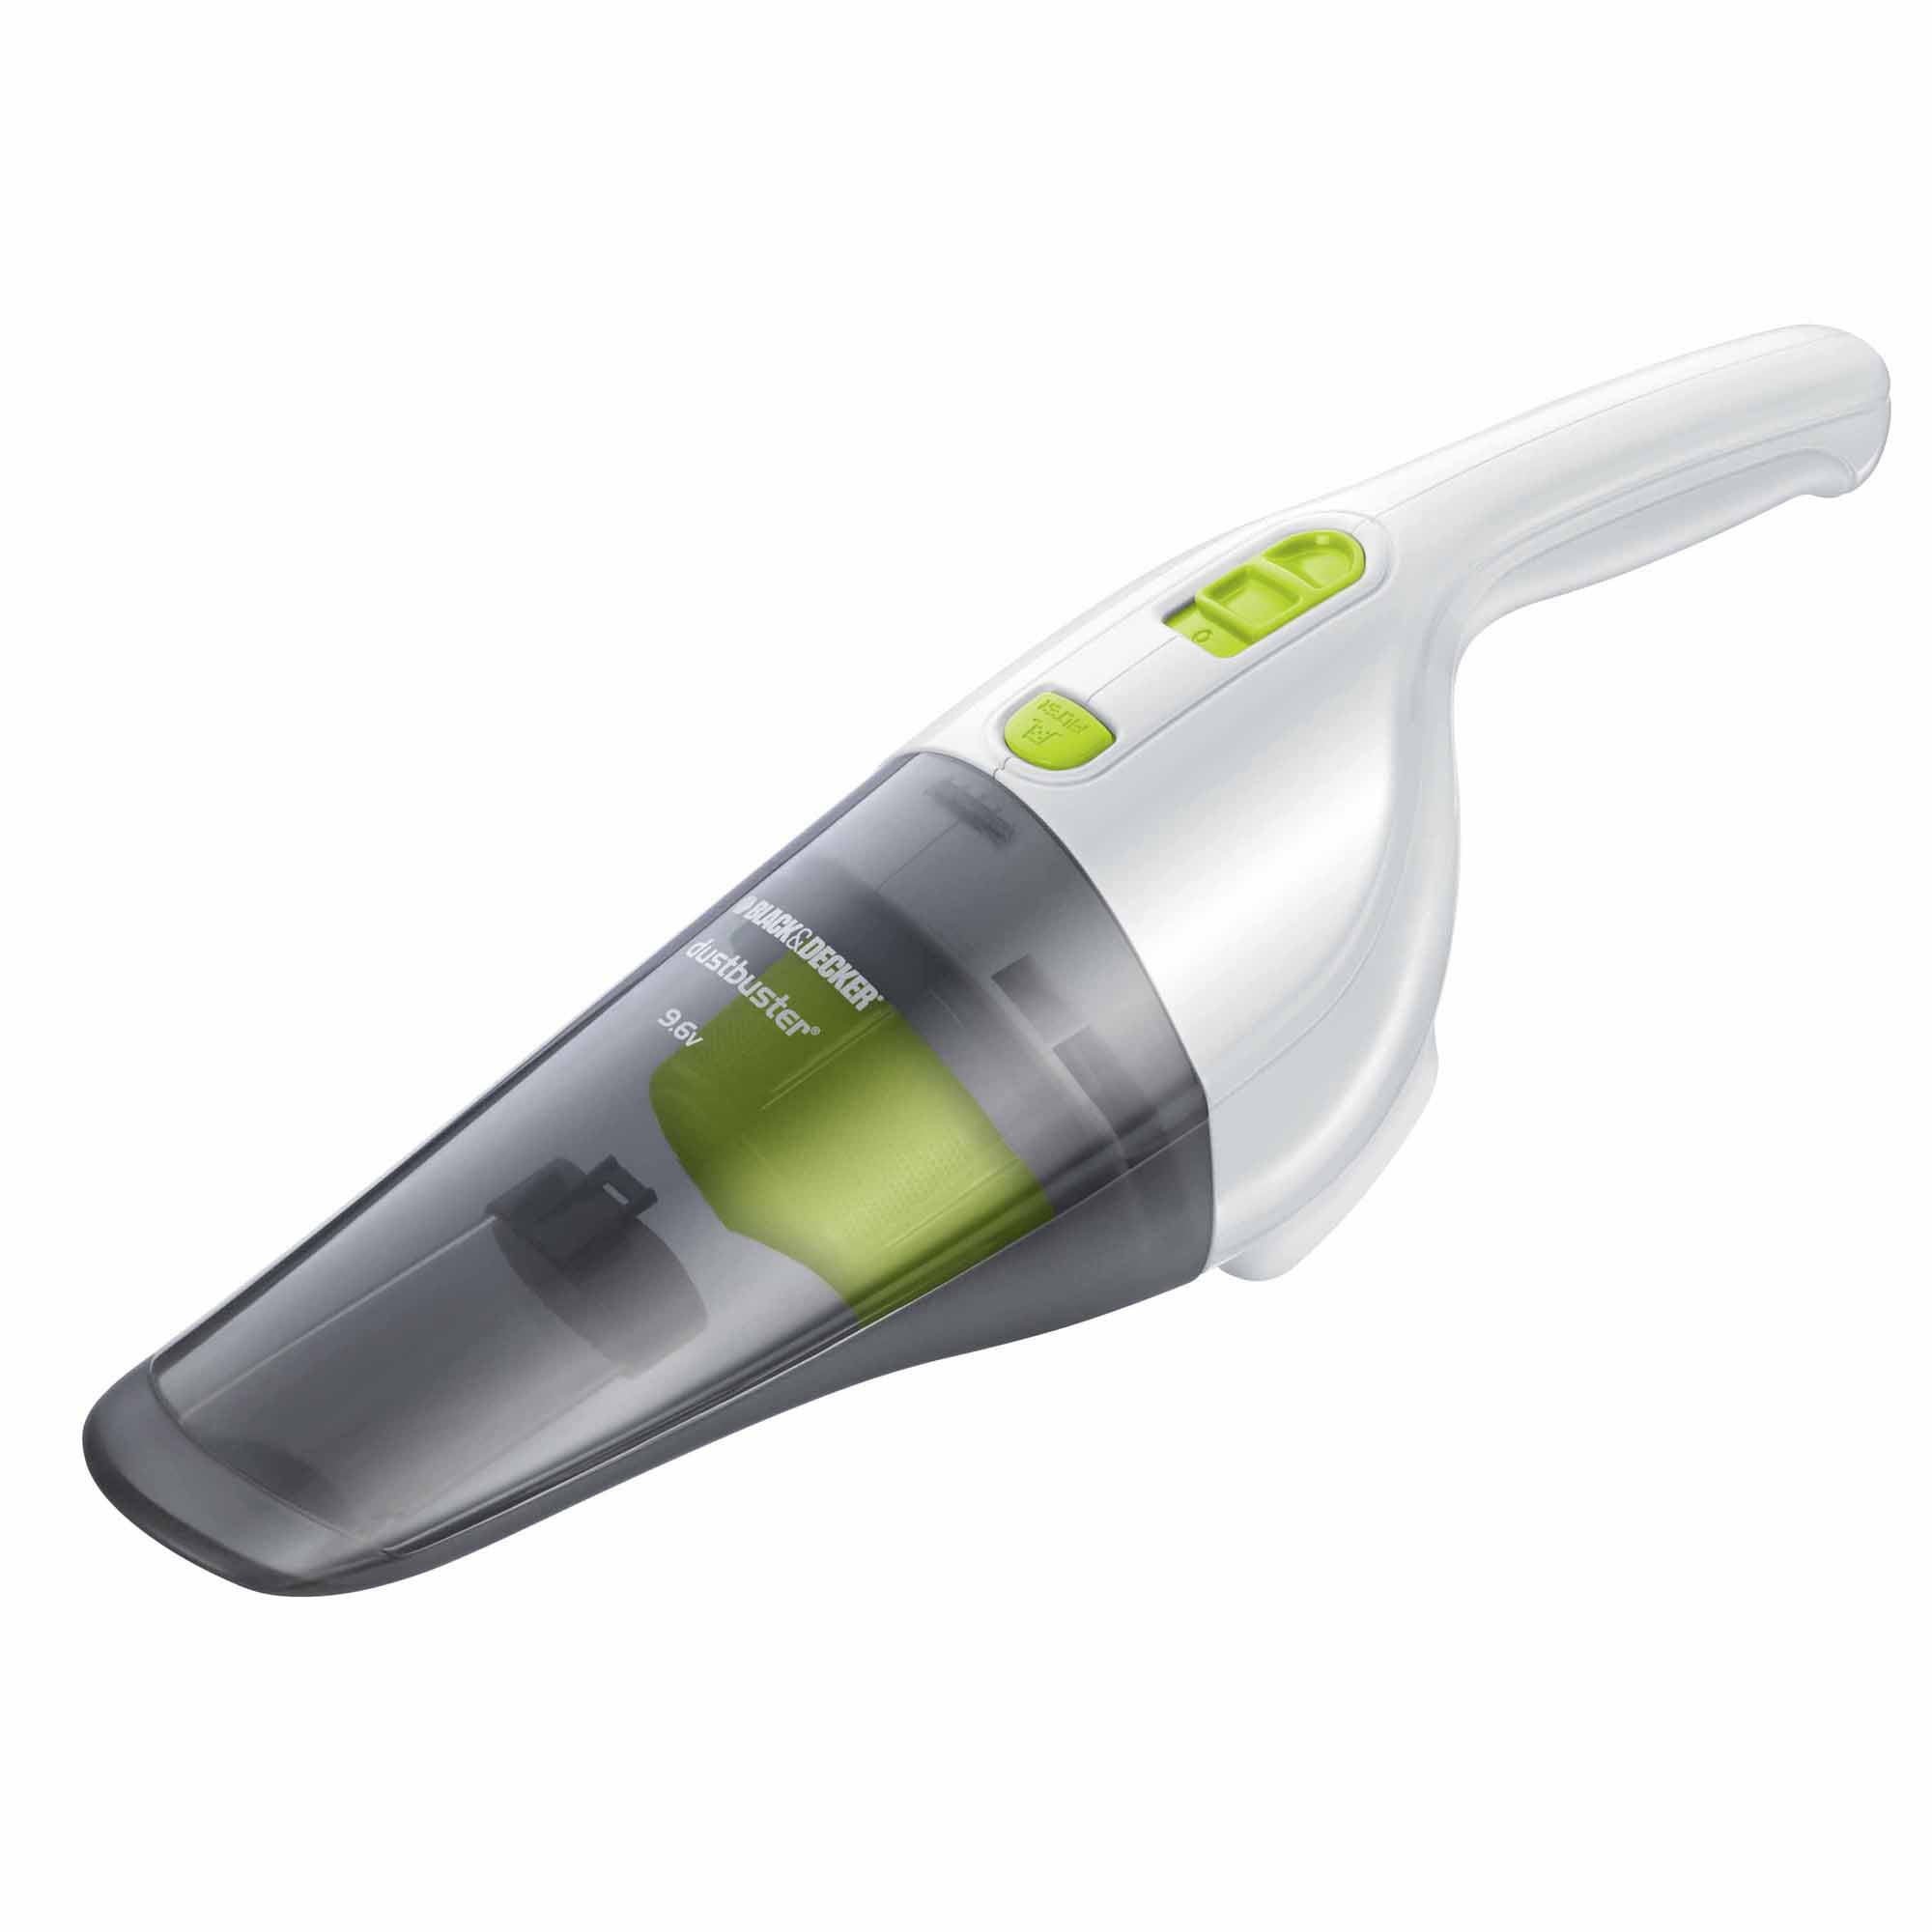 Black & Decker Charger And Base 9.6V Dustbuster Vacuum